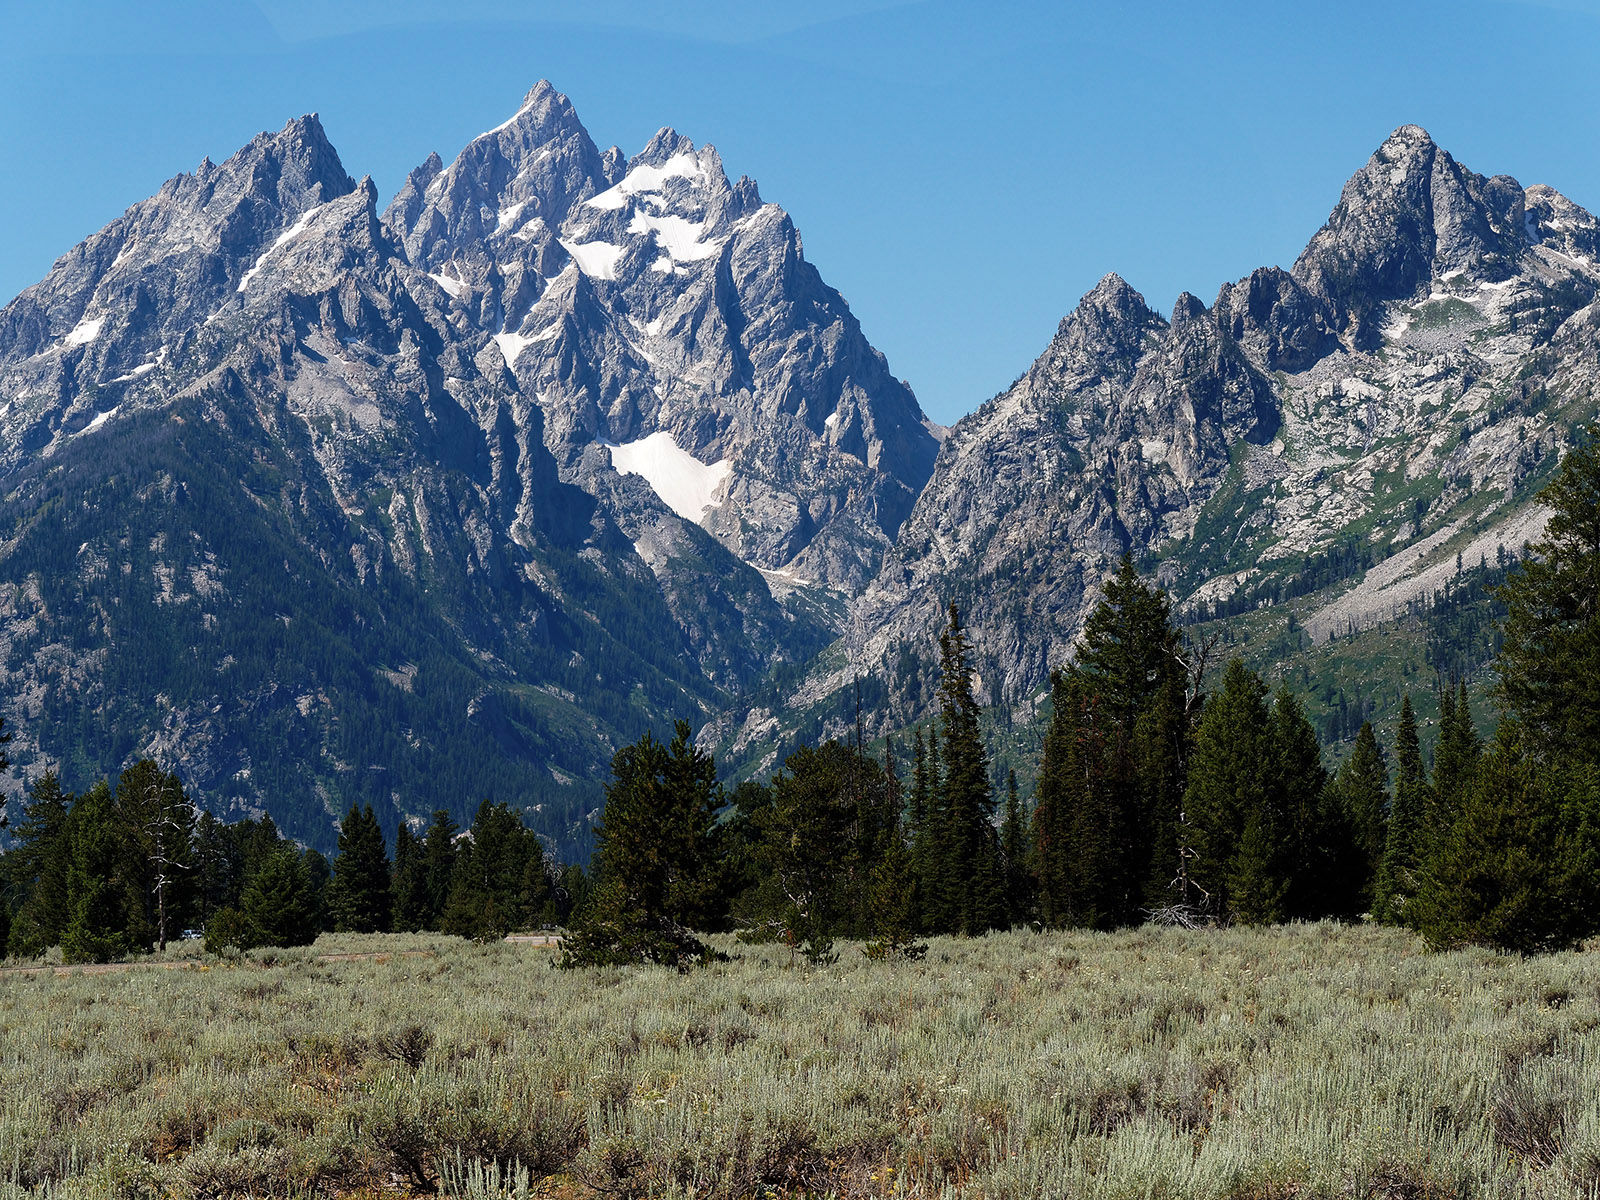 From left to right:  Teewinot, Grand Teton, Cascade Valley and Mt. St. John.